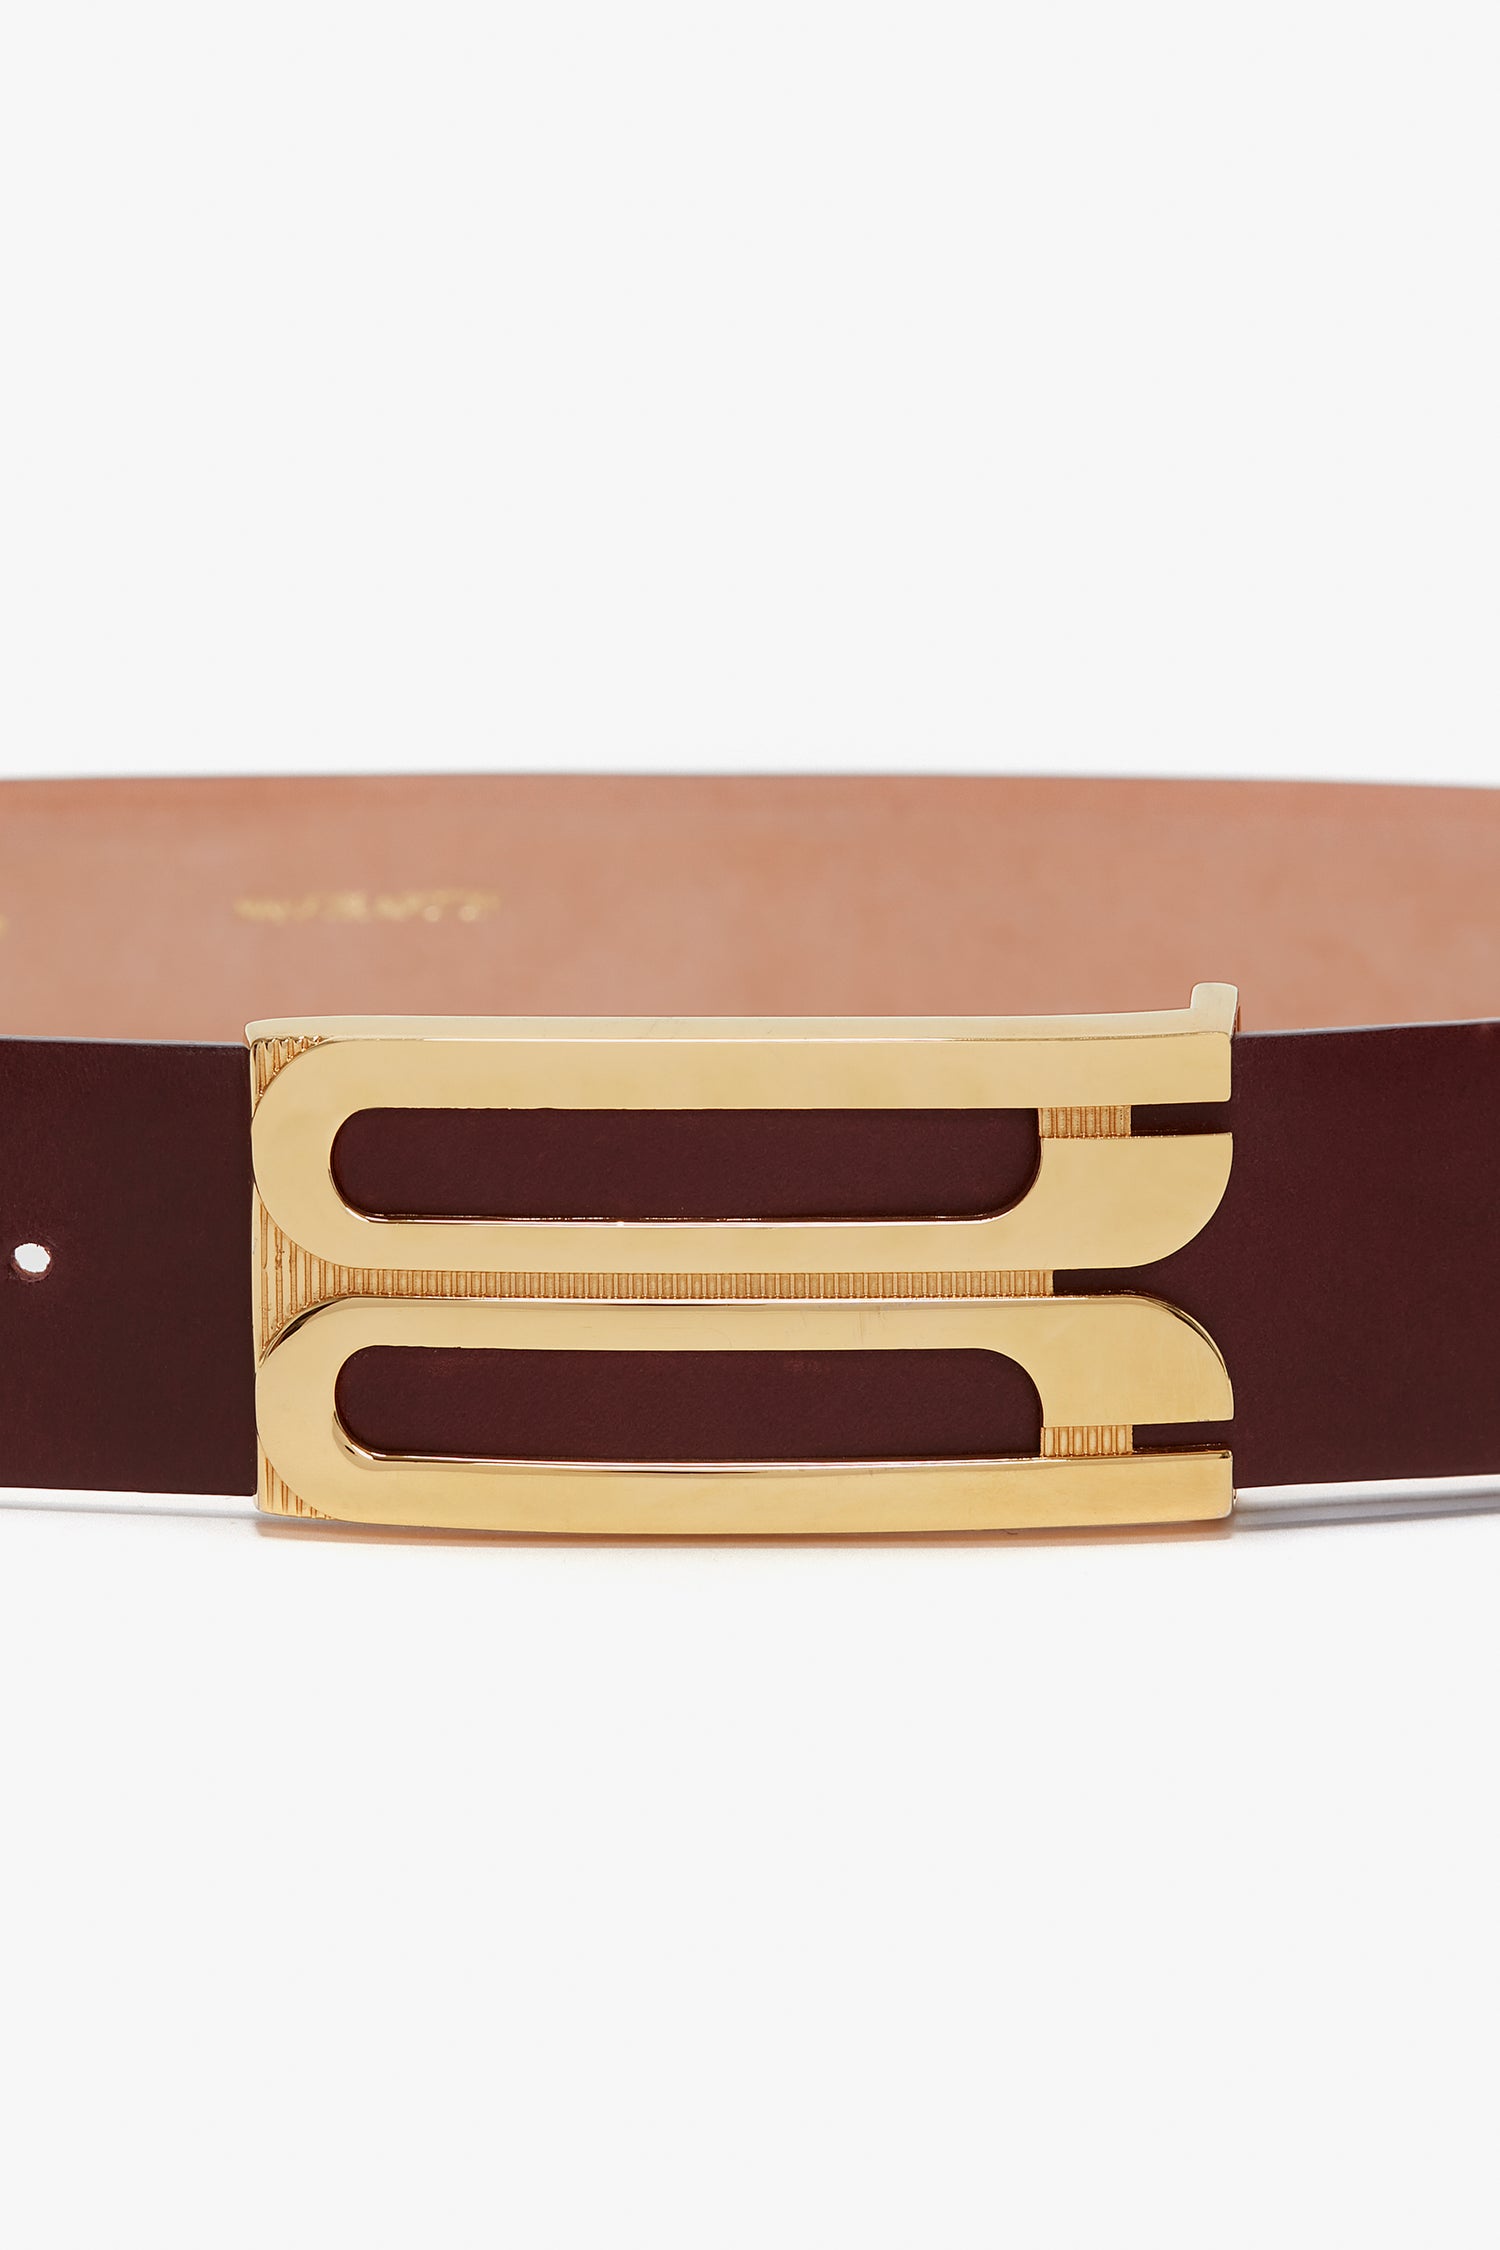 A contemporary brown calf leather belt with a gold rectangular buckle featuring two parallel cut-out slots is replaced by the Jumbo Frame Belt In Burgundy Leather from Victoria Beckham.